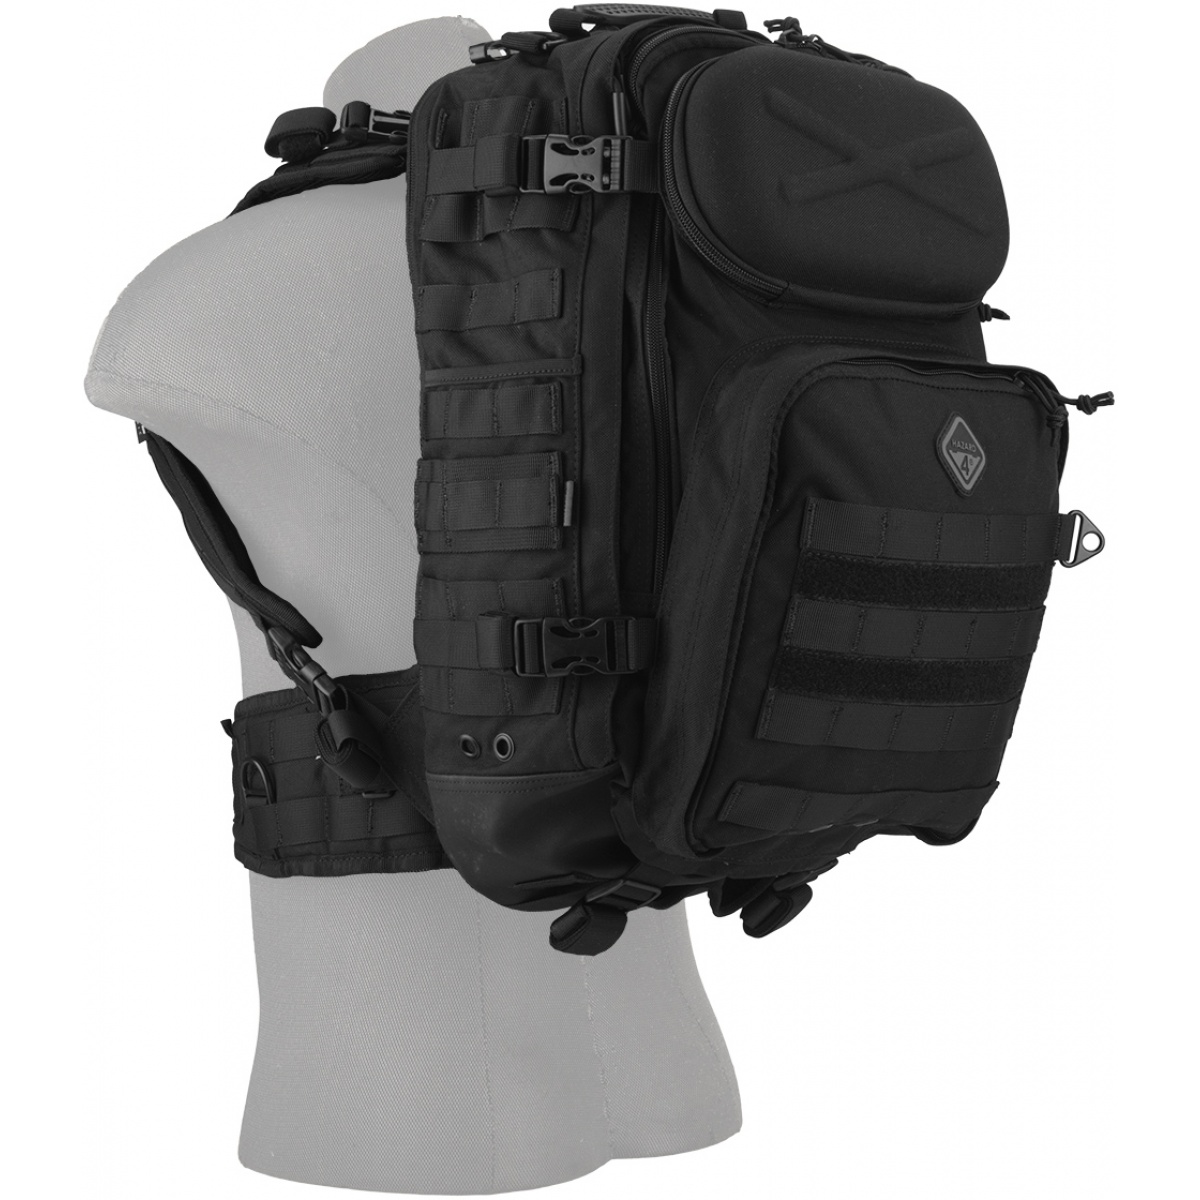 HAZARD4(ハザード4) Patrol Pack Thermo Cap Daypack Coyote リュック、バッグ